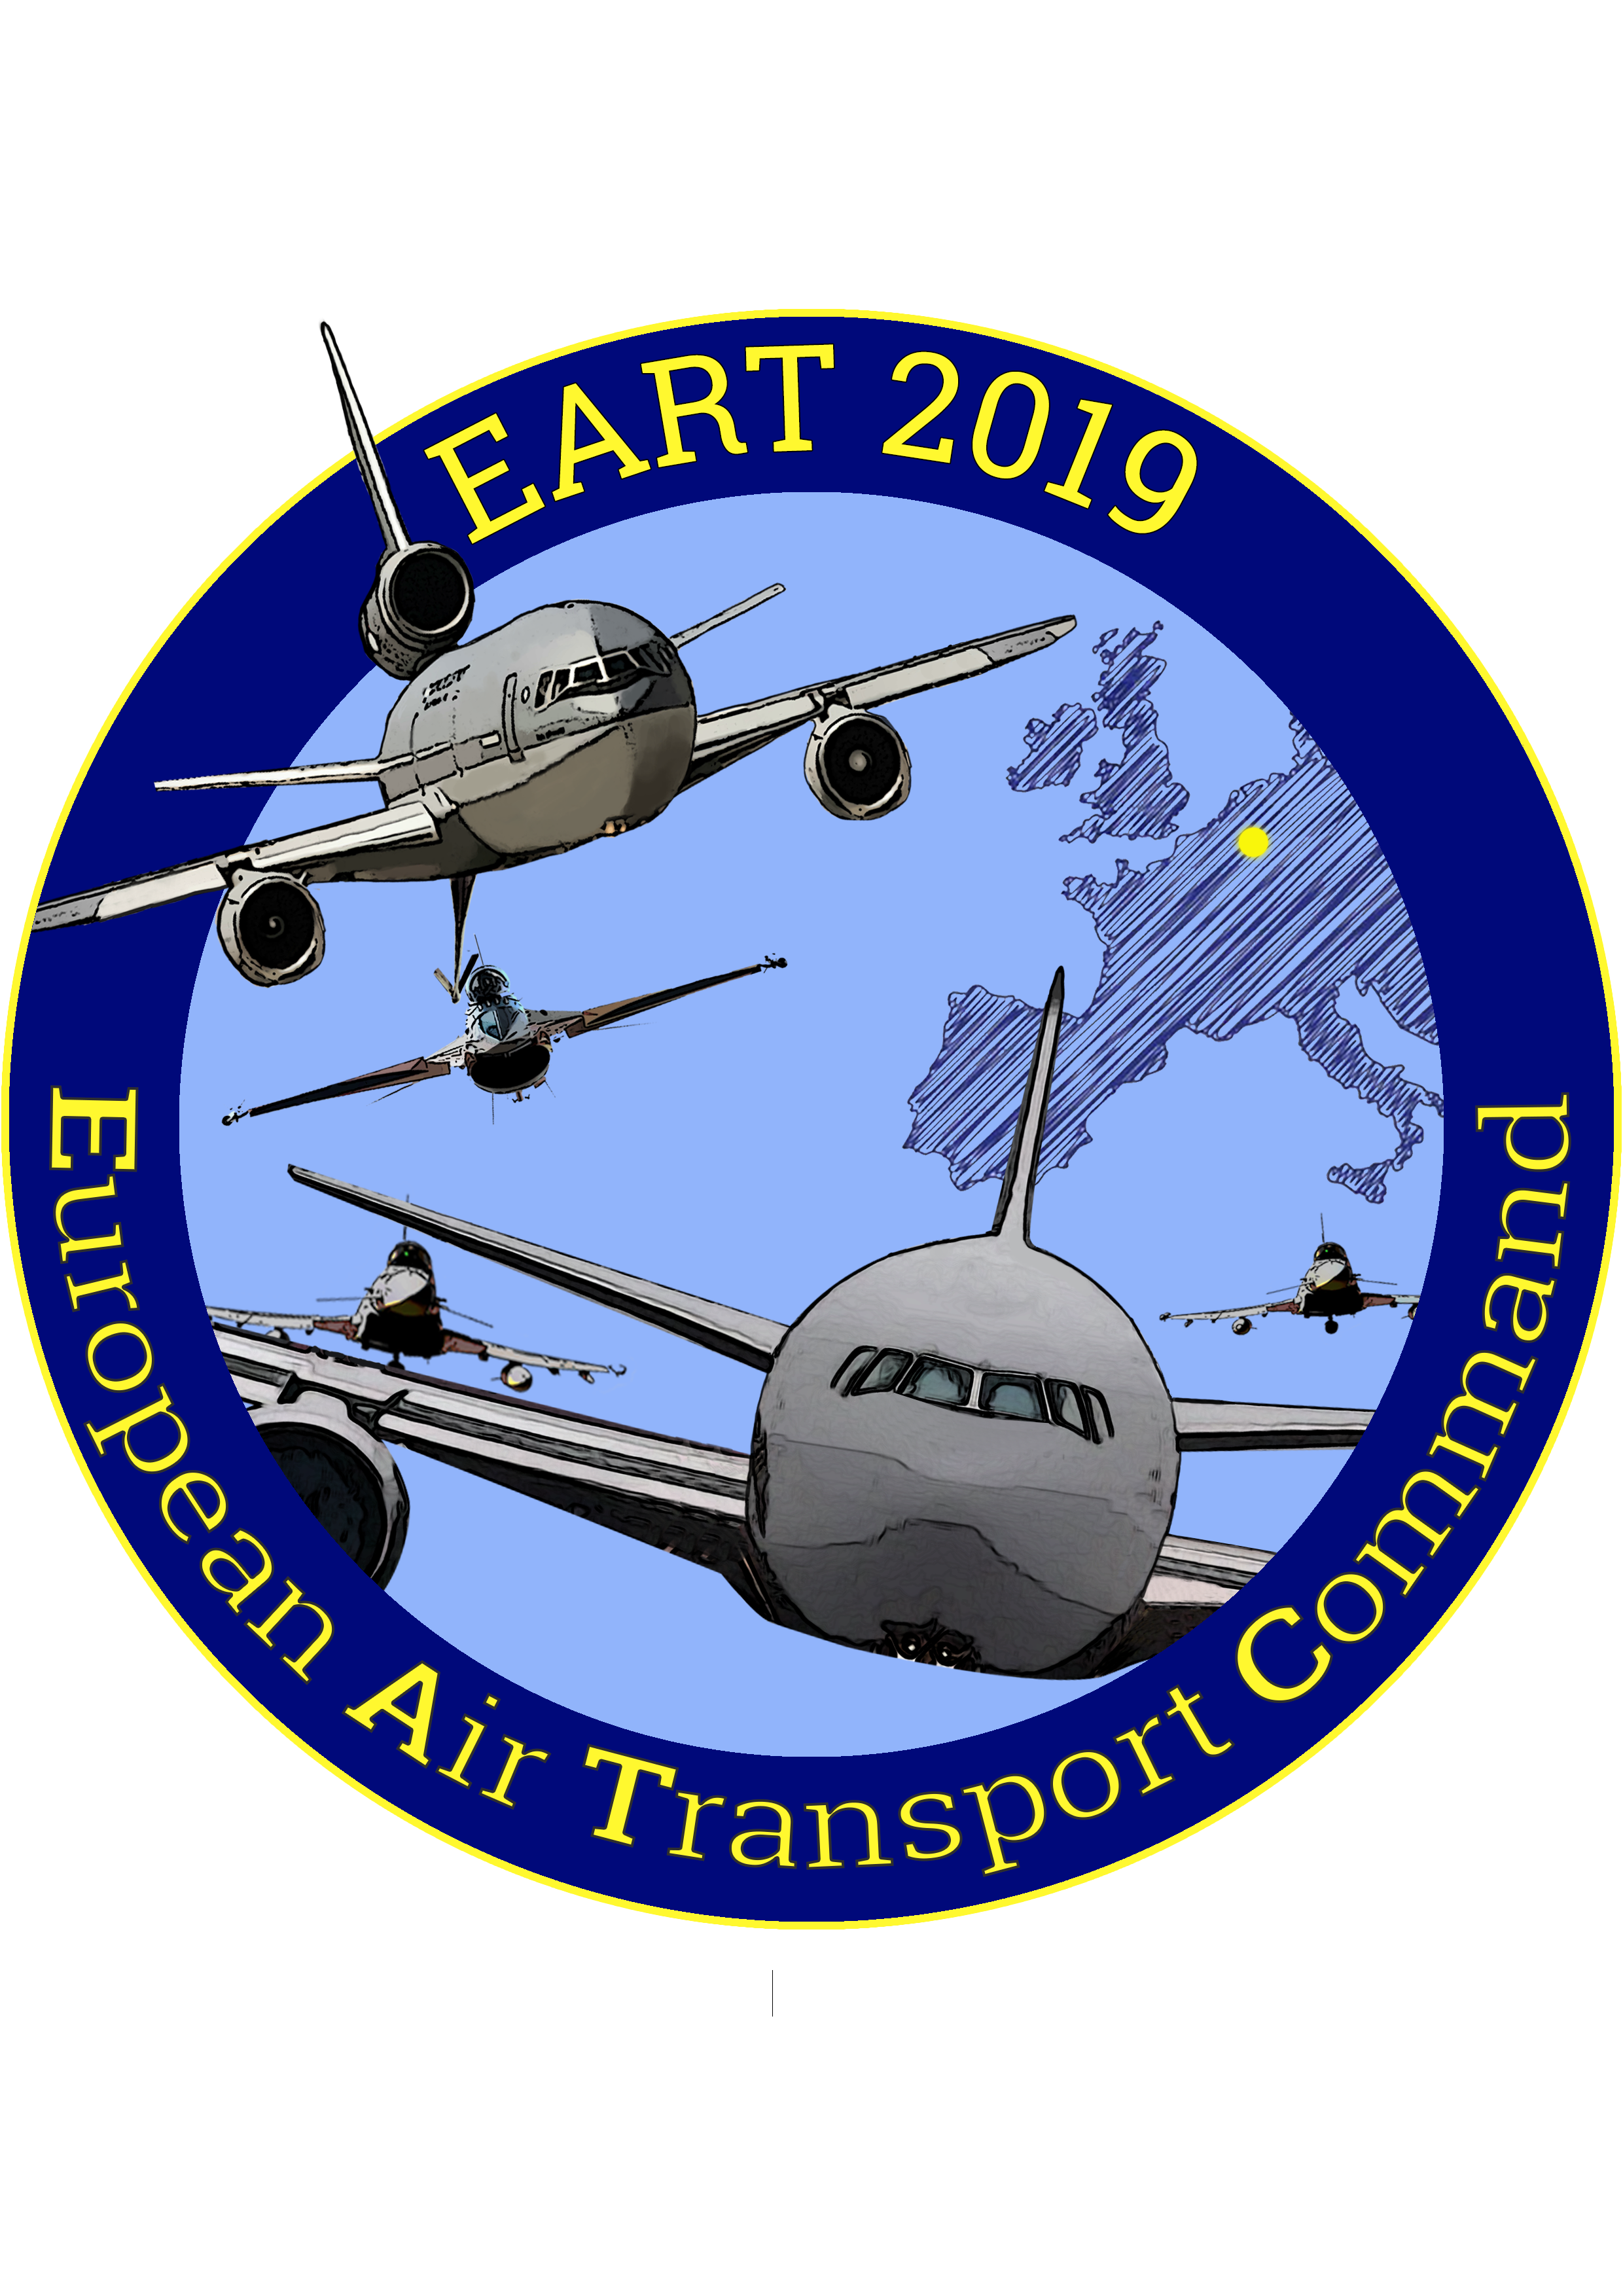 The sixth edition of EART is to be launched!